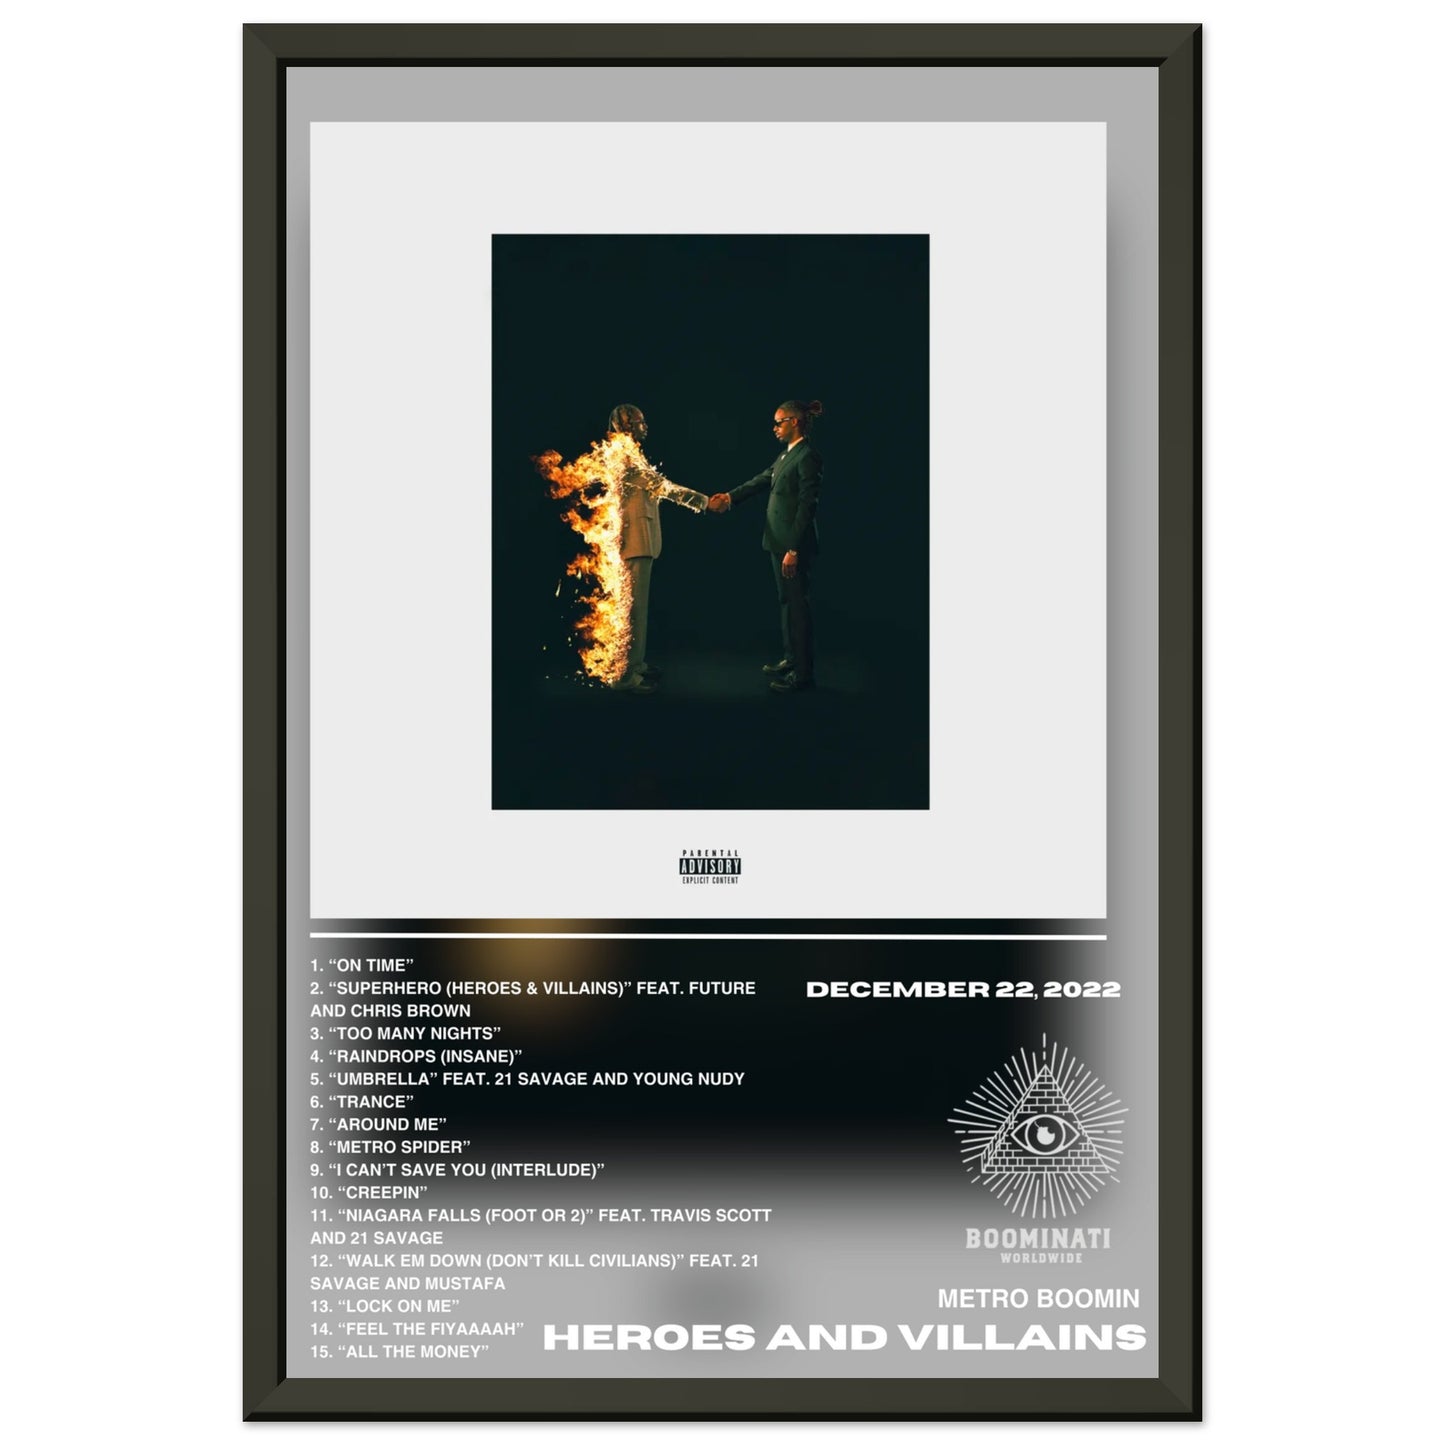 Metro Boomin "HEROES AND VILLAINS"